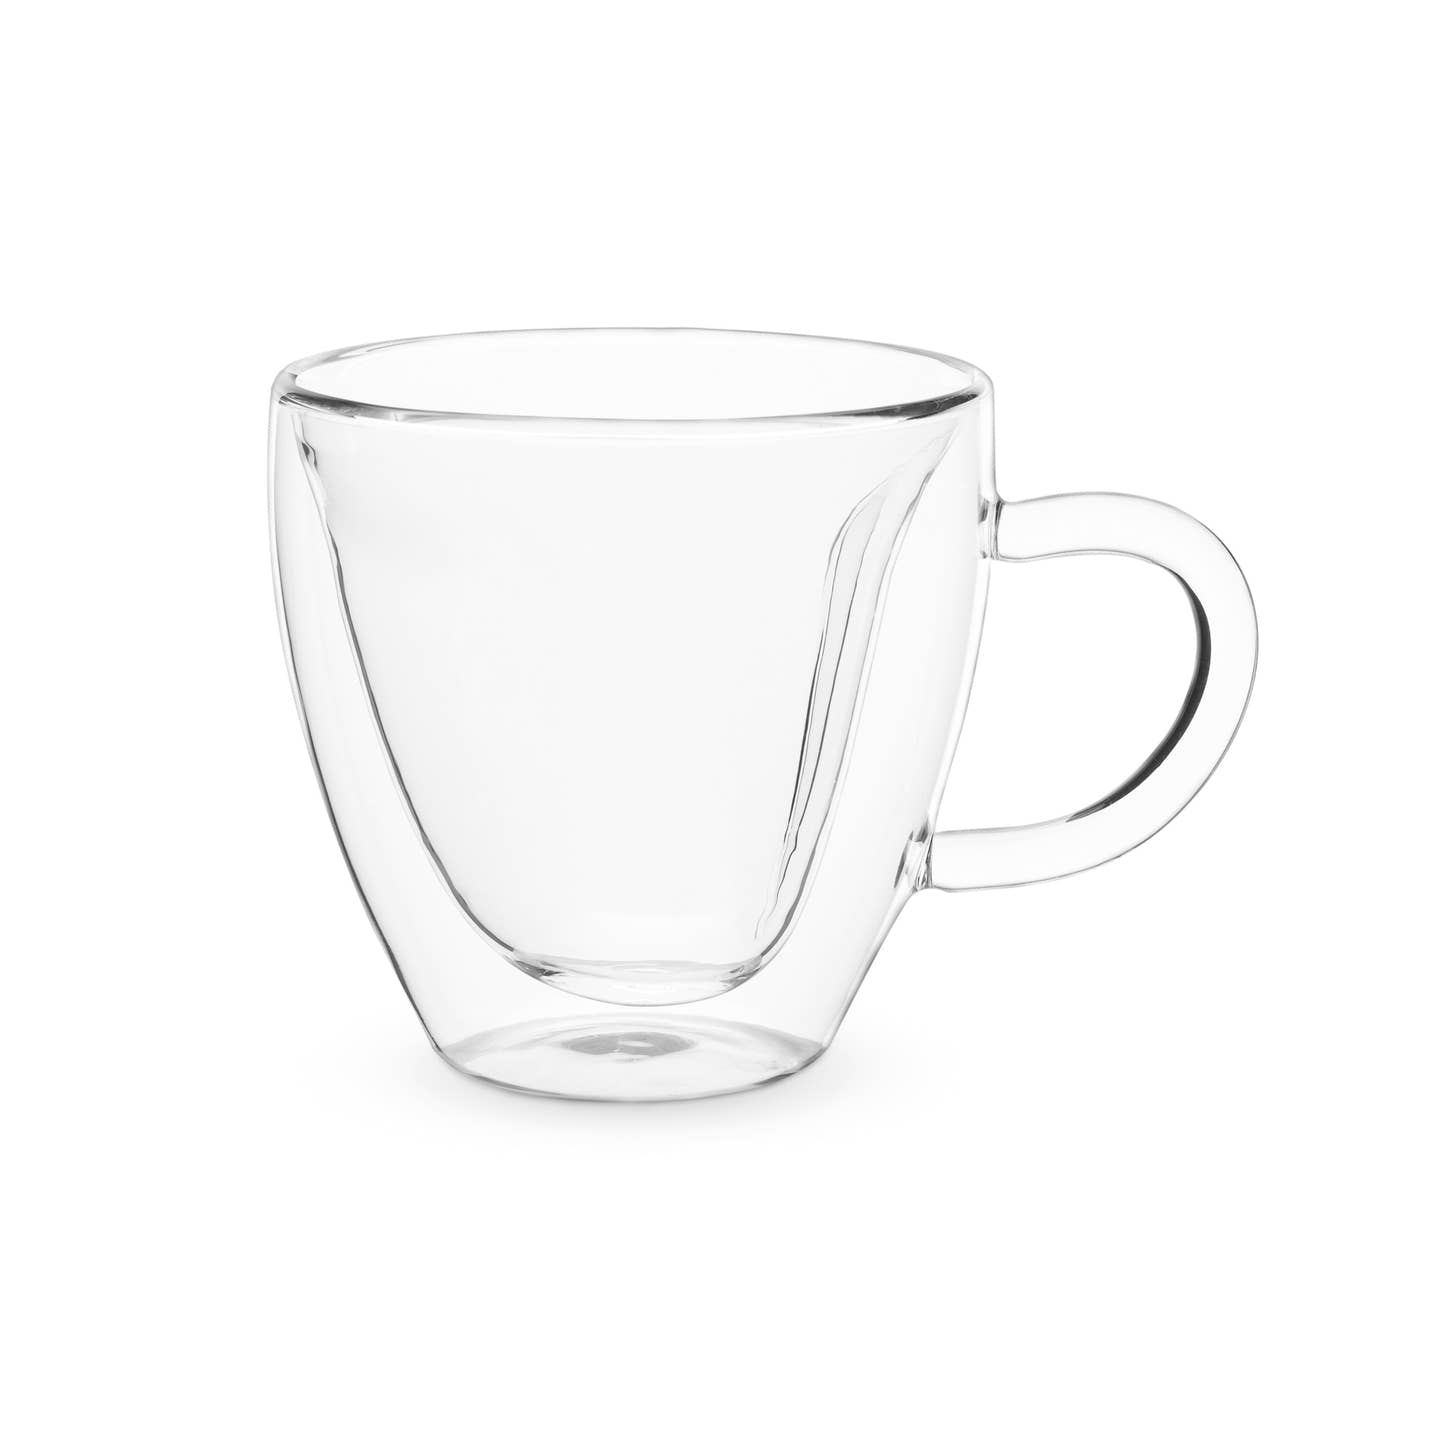 Sips by double-walled glass heart mug